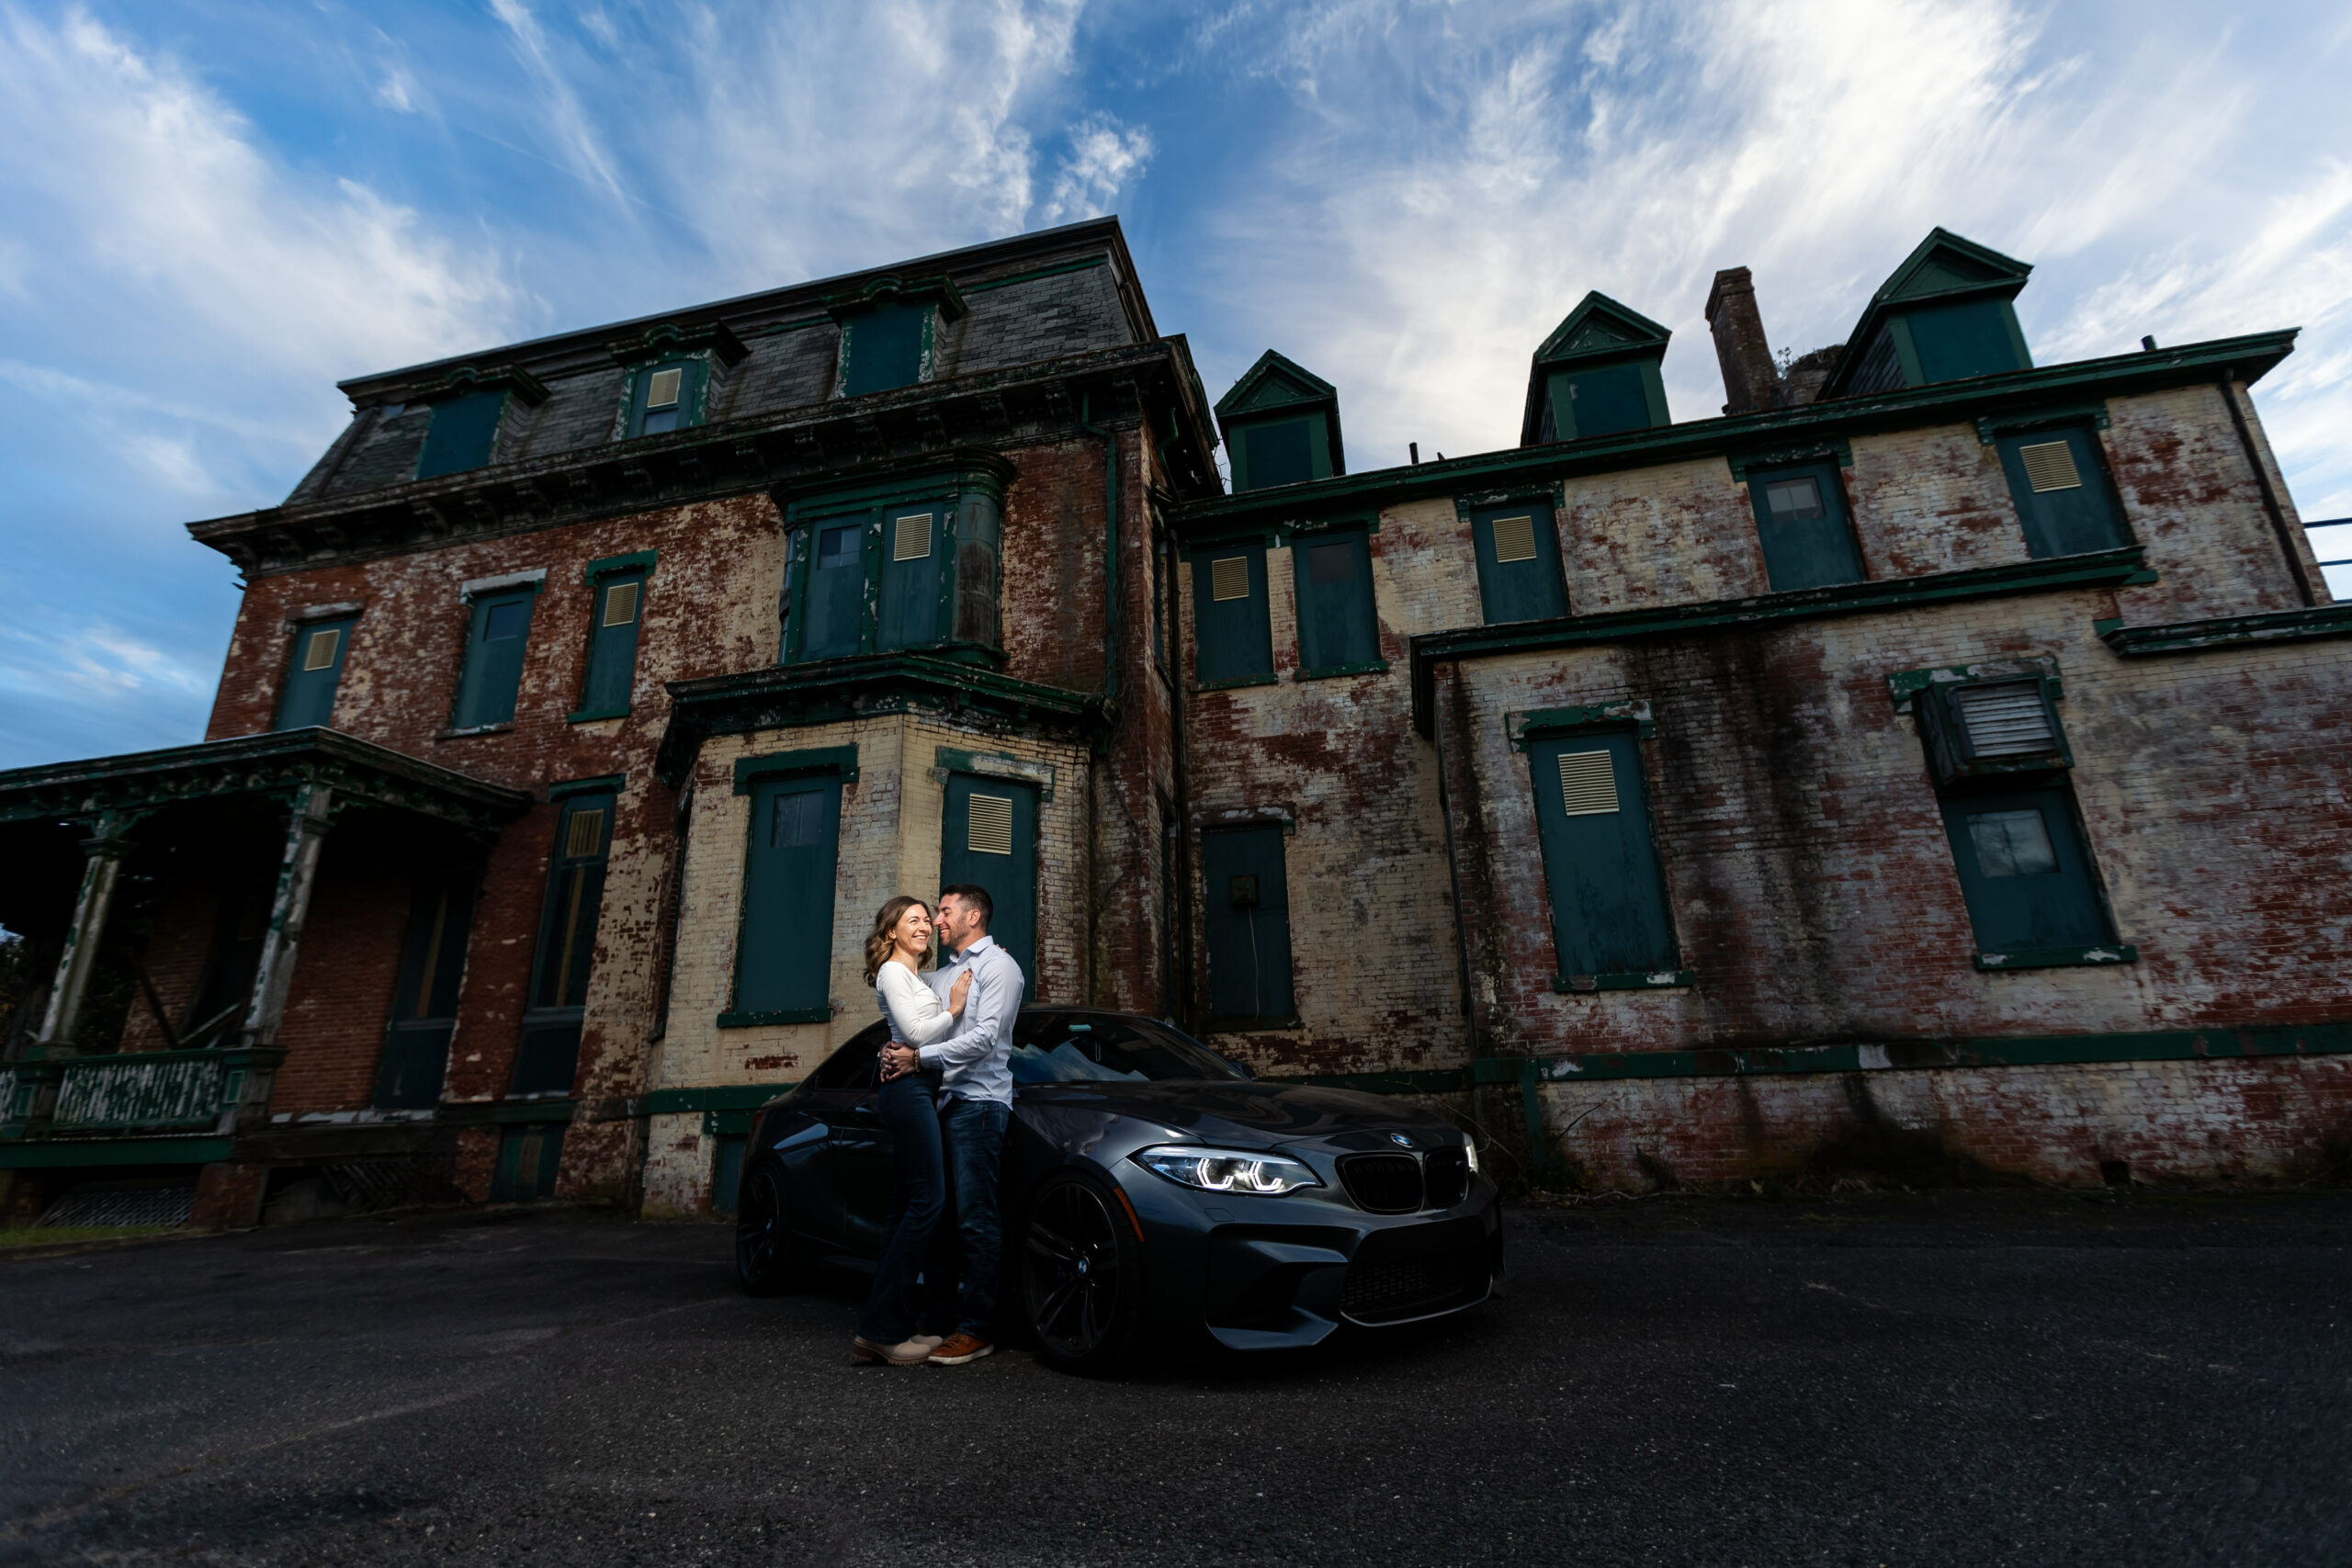 A couple captured by New Jersey Wedding Photographer Jarot Bocanegra poses in front of an old mansion.